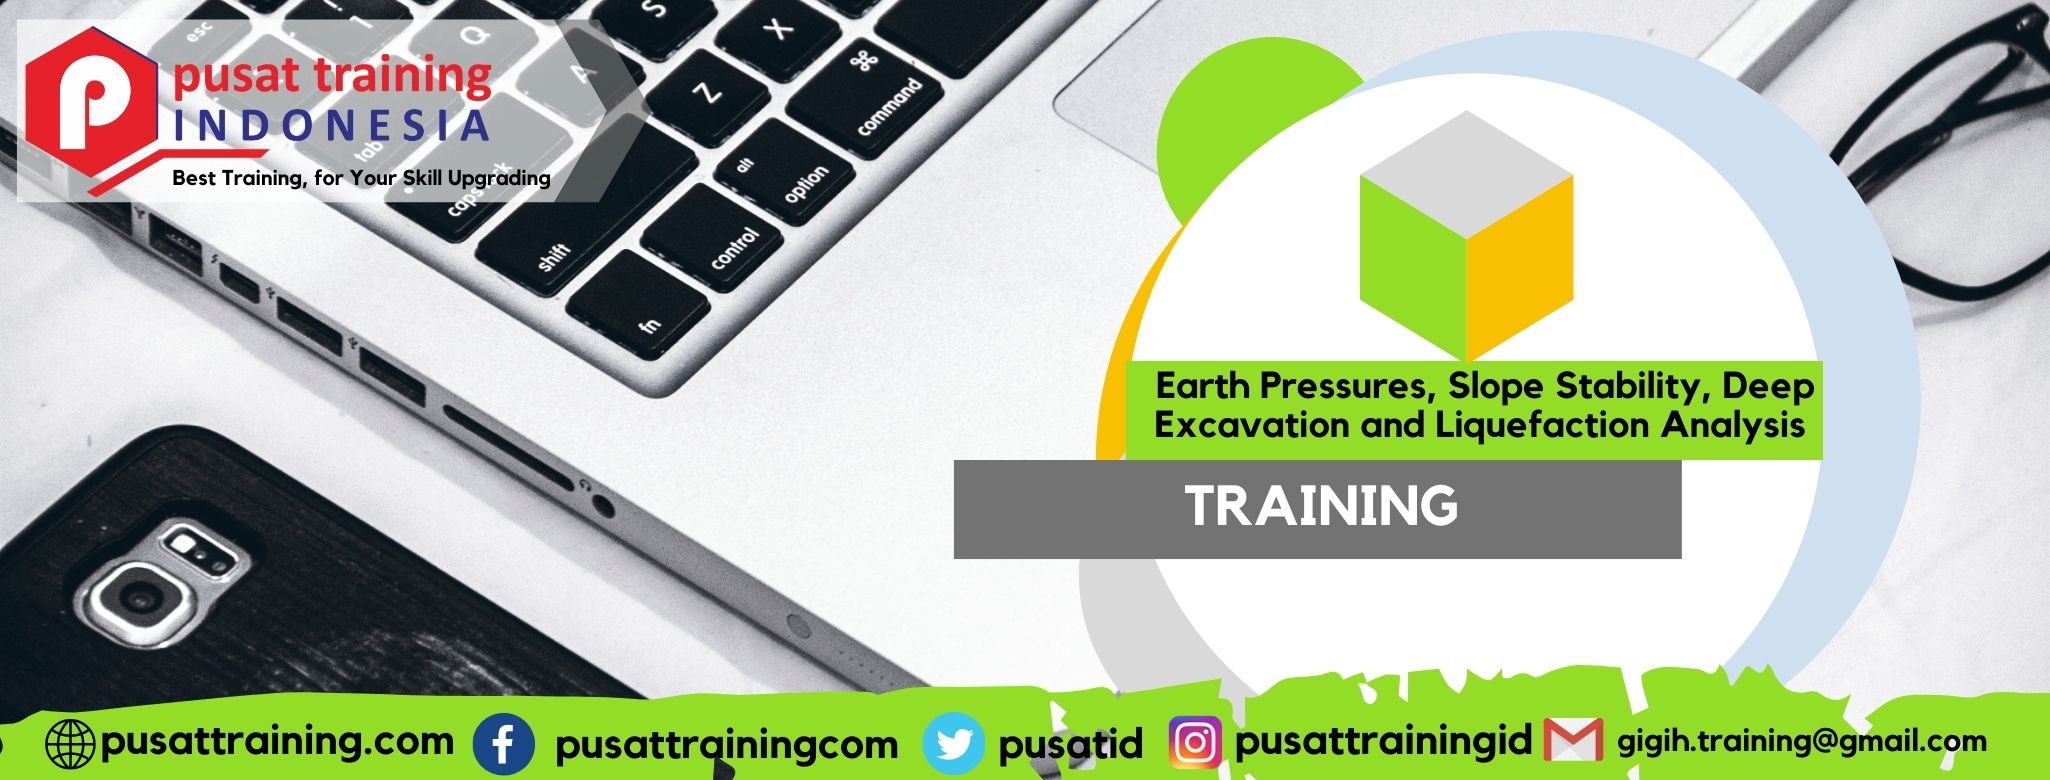 Earth Pressures, Slope Stability, Deep Excavation and Liquefaction Analysis Training